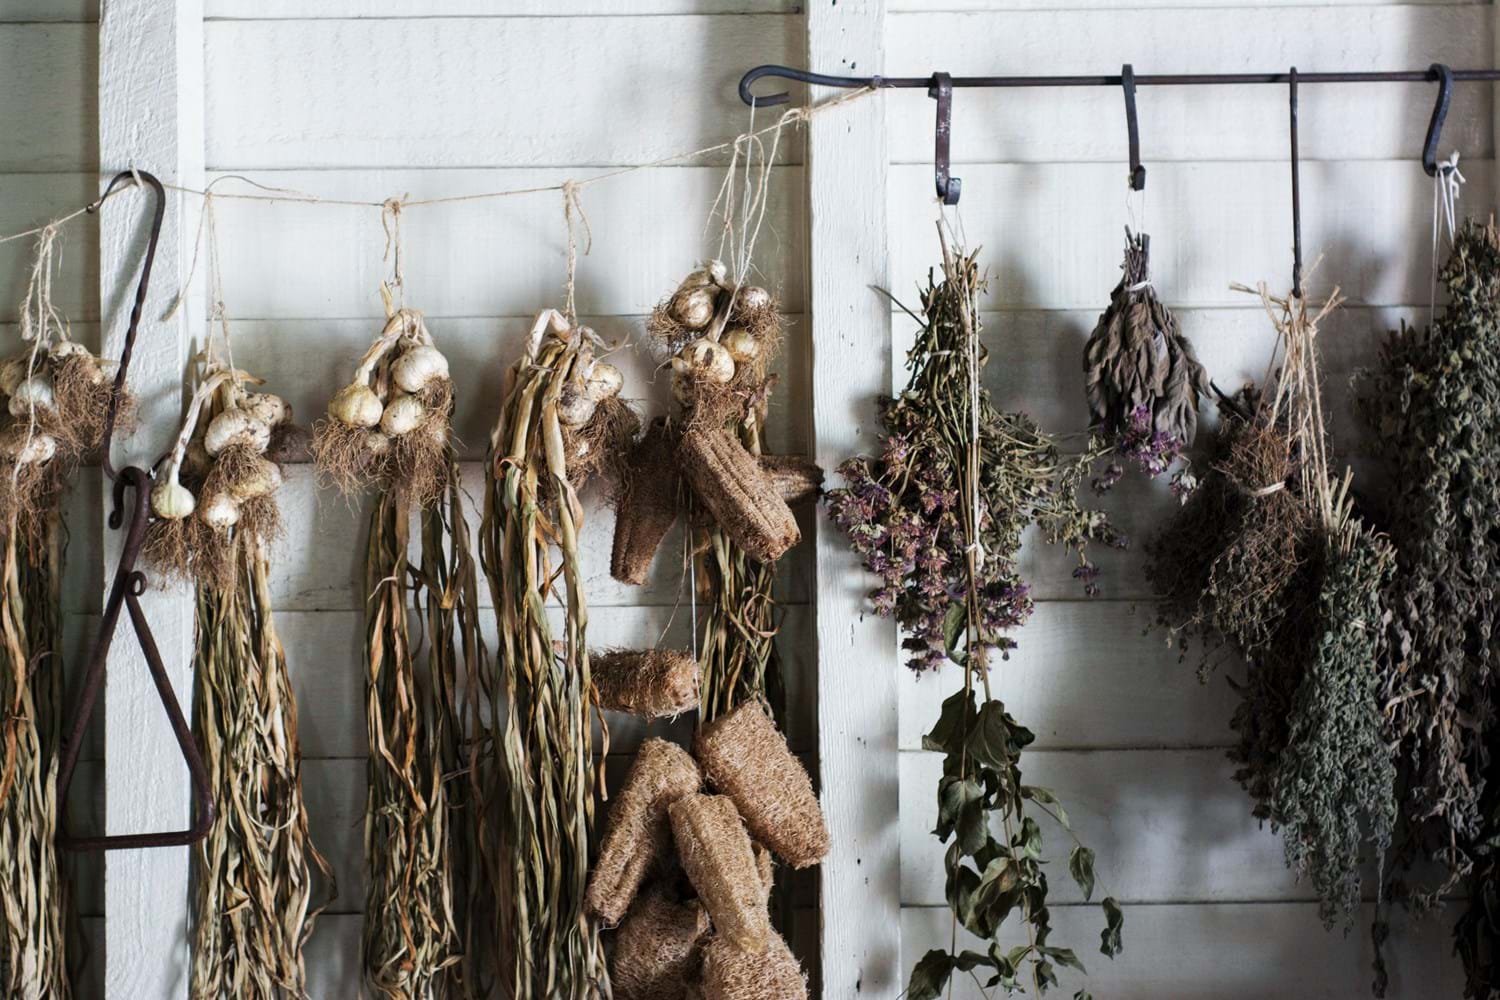 Dried herbs hang from a rack